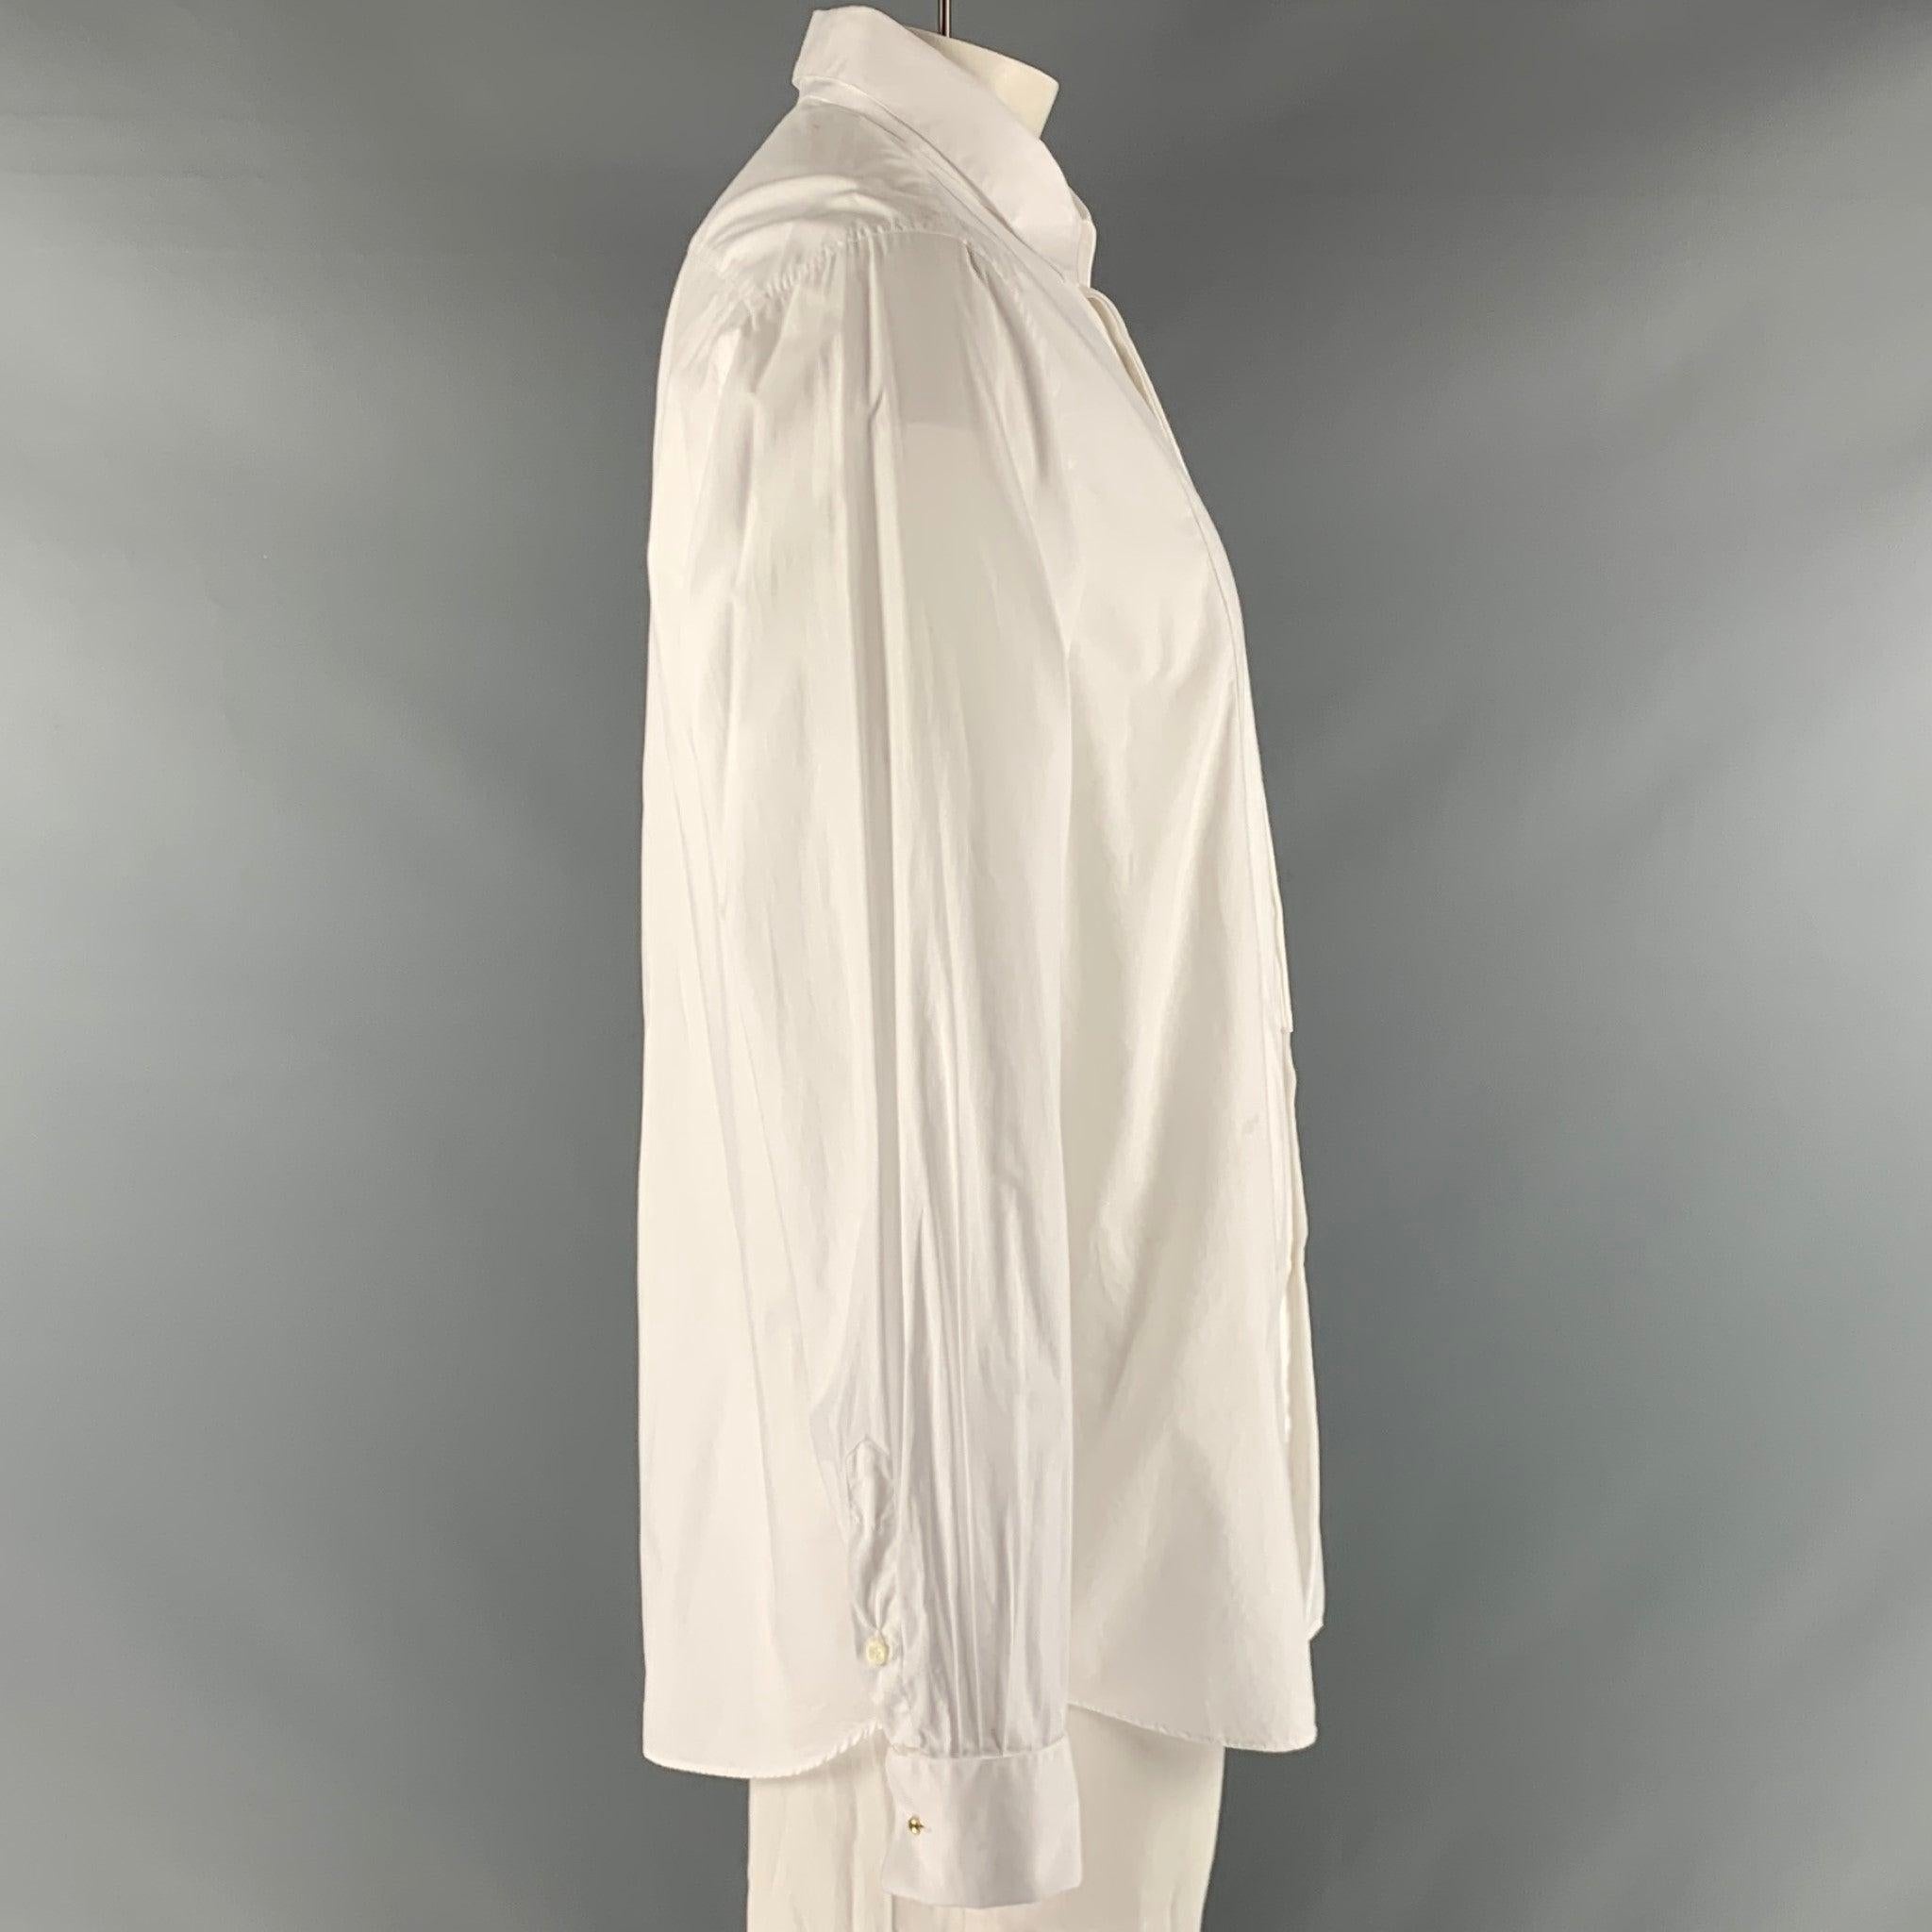 VALENTINO tuxedo long sleeve shirt comes in a white cotton fabric featuring a straight collar, french cuff, and a button down closure. Cuff links not included. Made in Italy.Very Good Pre-Owned Condition. Moderate signs of wear. 

Marked:   46 18